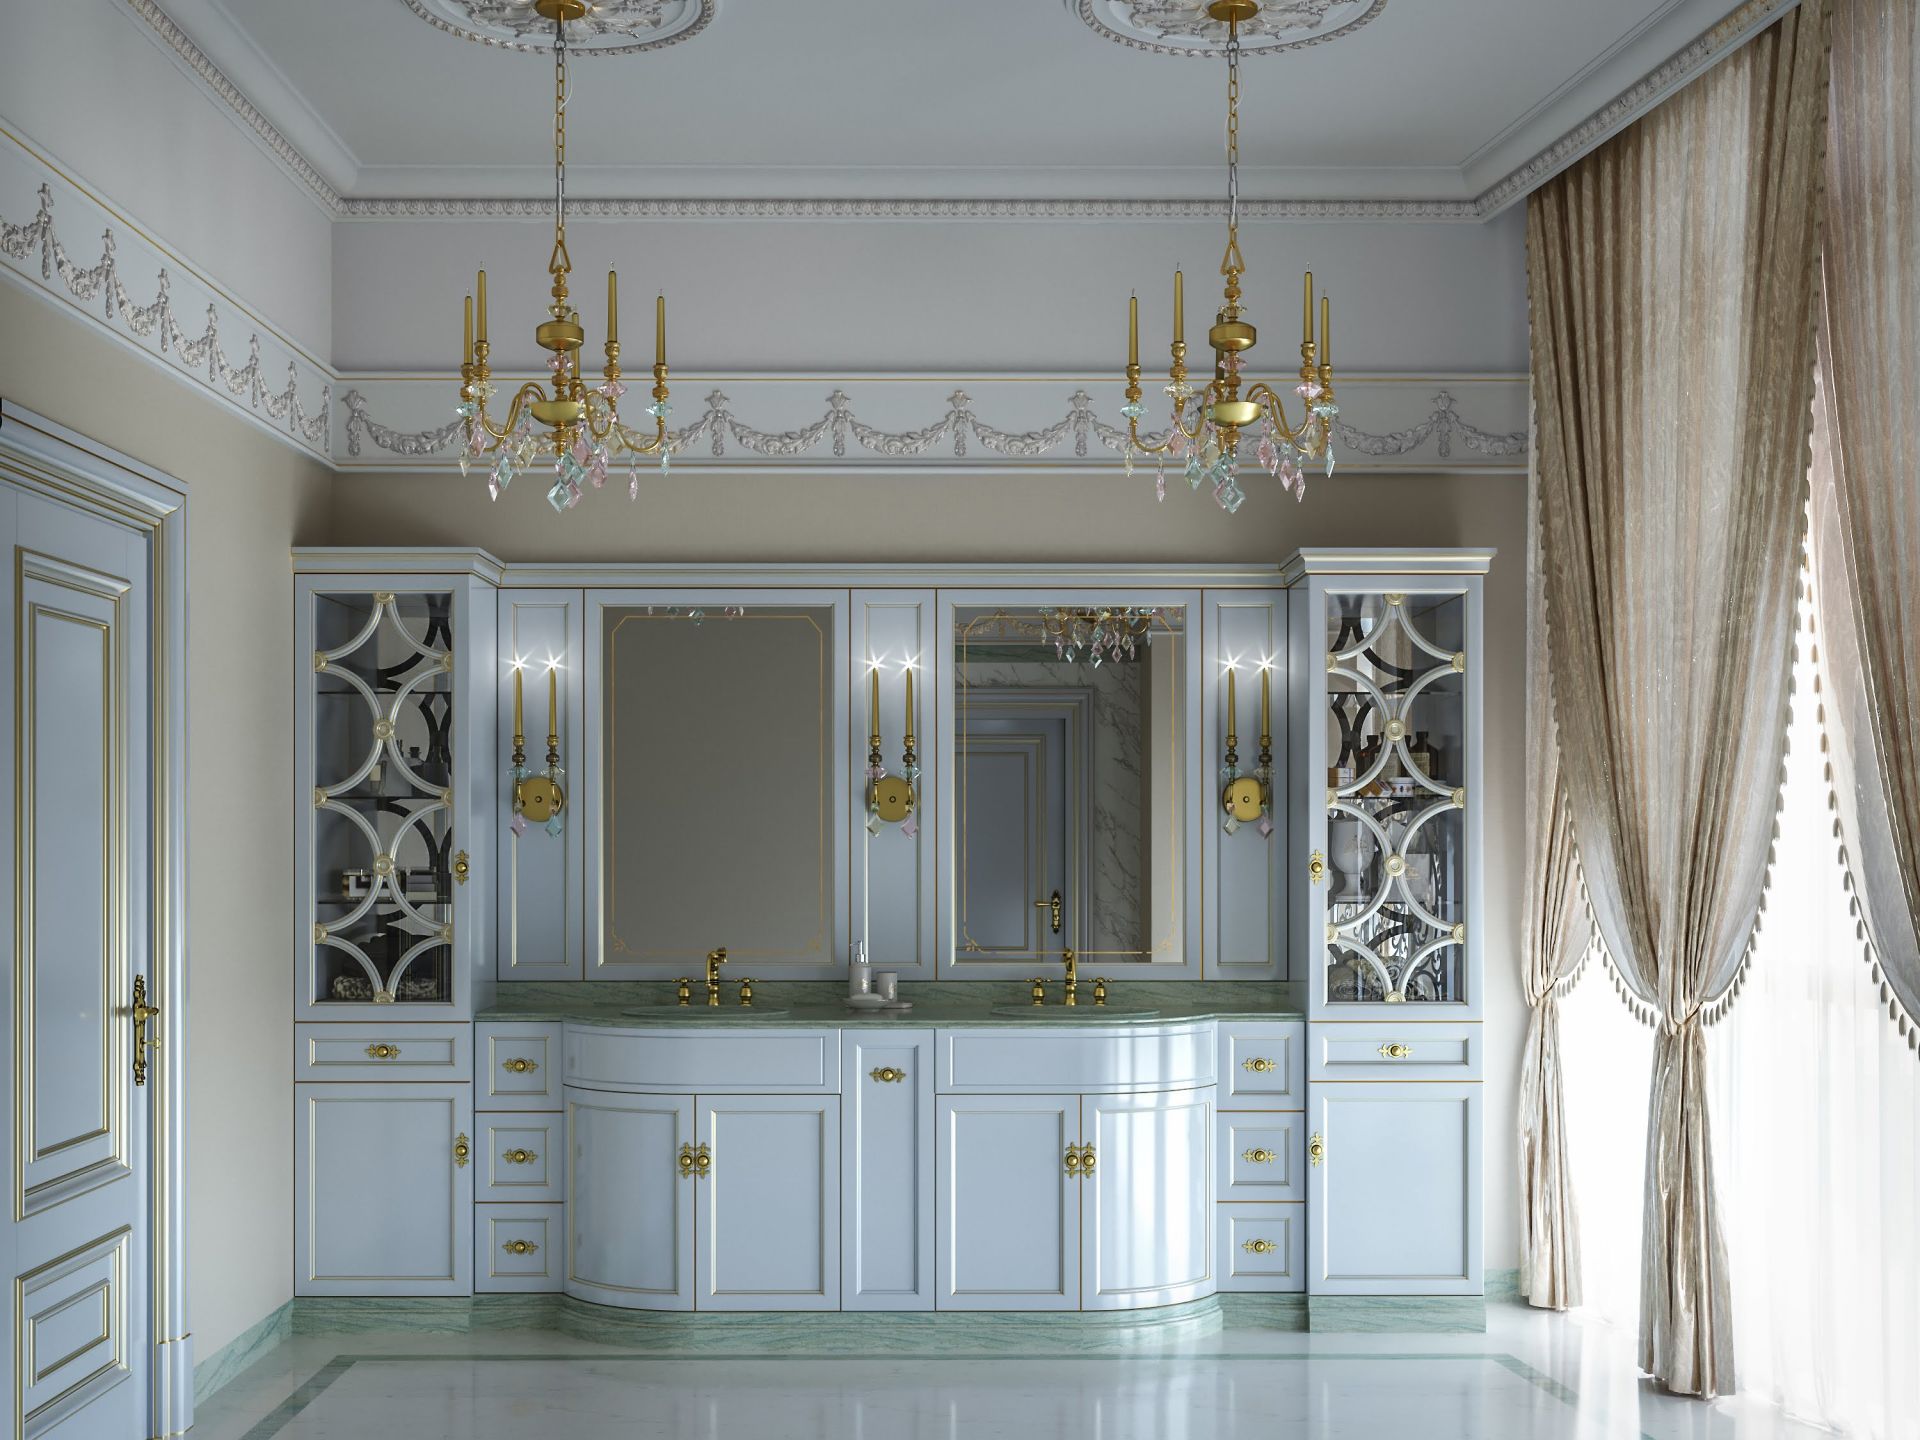 Luxurious bathroom design in neoclassical style